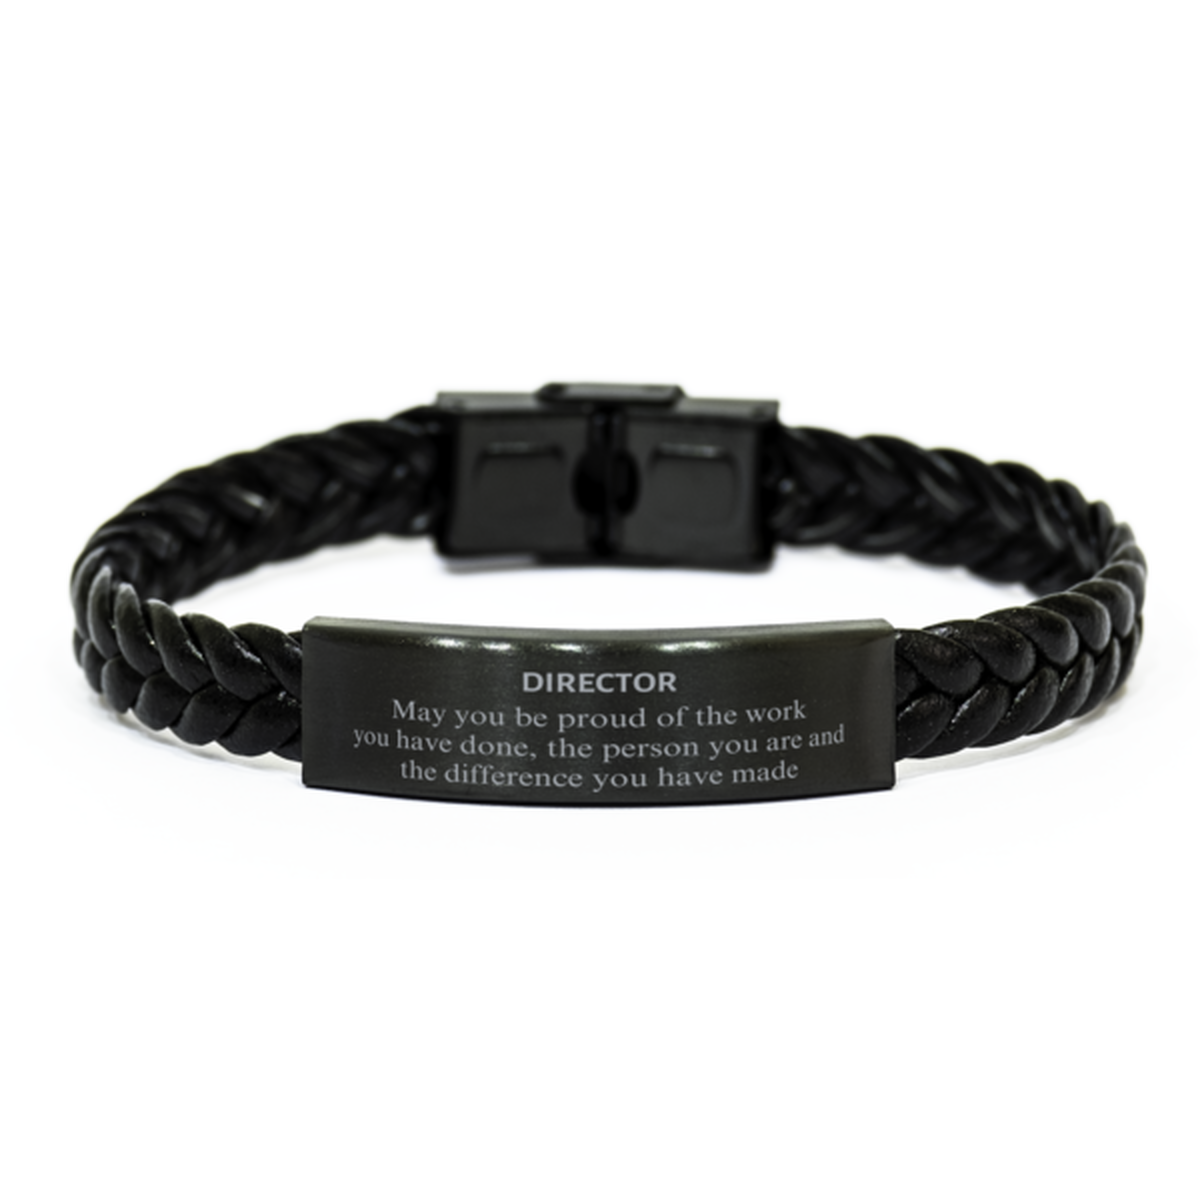 Director May you be proud of the work you have done, Retirement Director Braided Leather Bracelet for Colleague Appreciation Gifts Amazing for Director